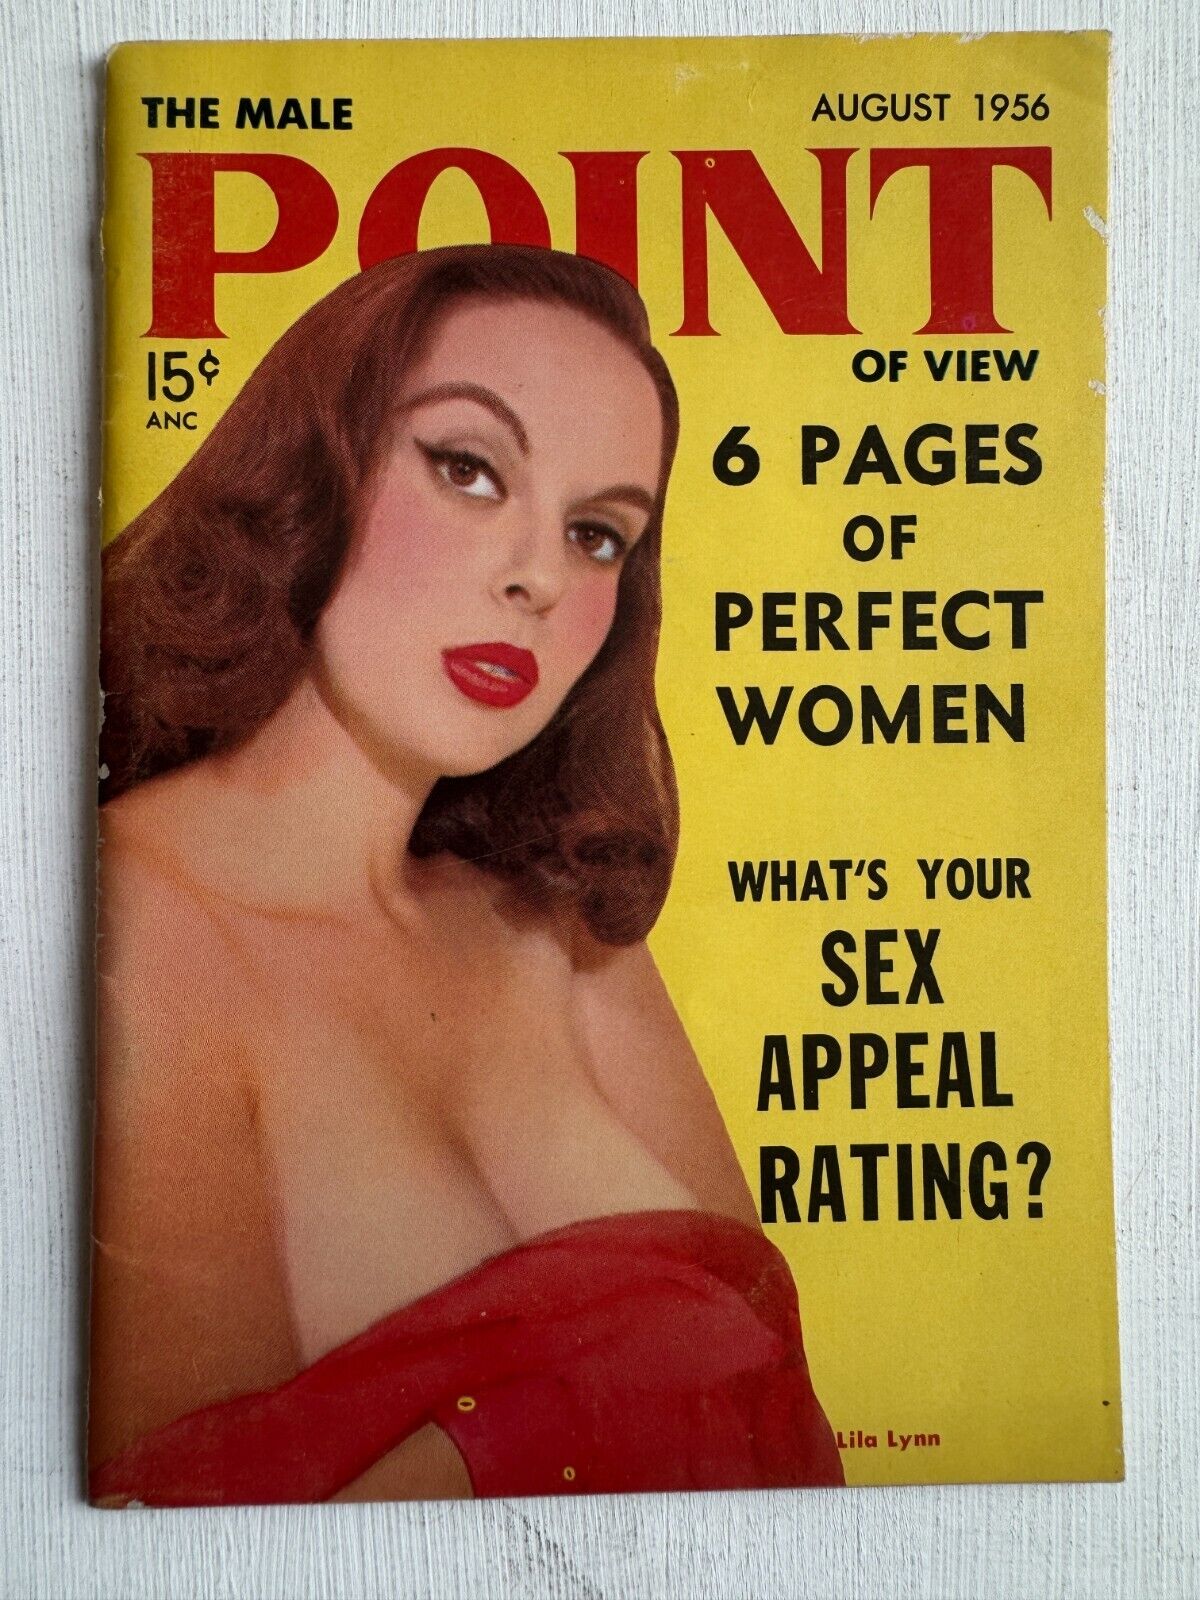 Pocket August 1956 The Male Point of View- Men's Magazine w/ Pinup Girls